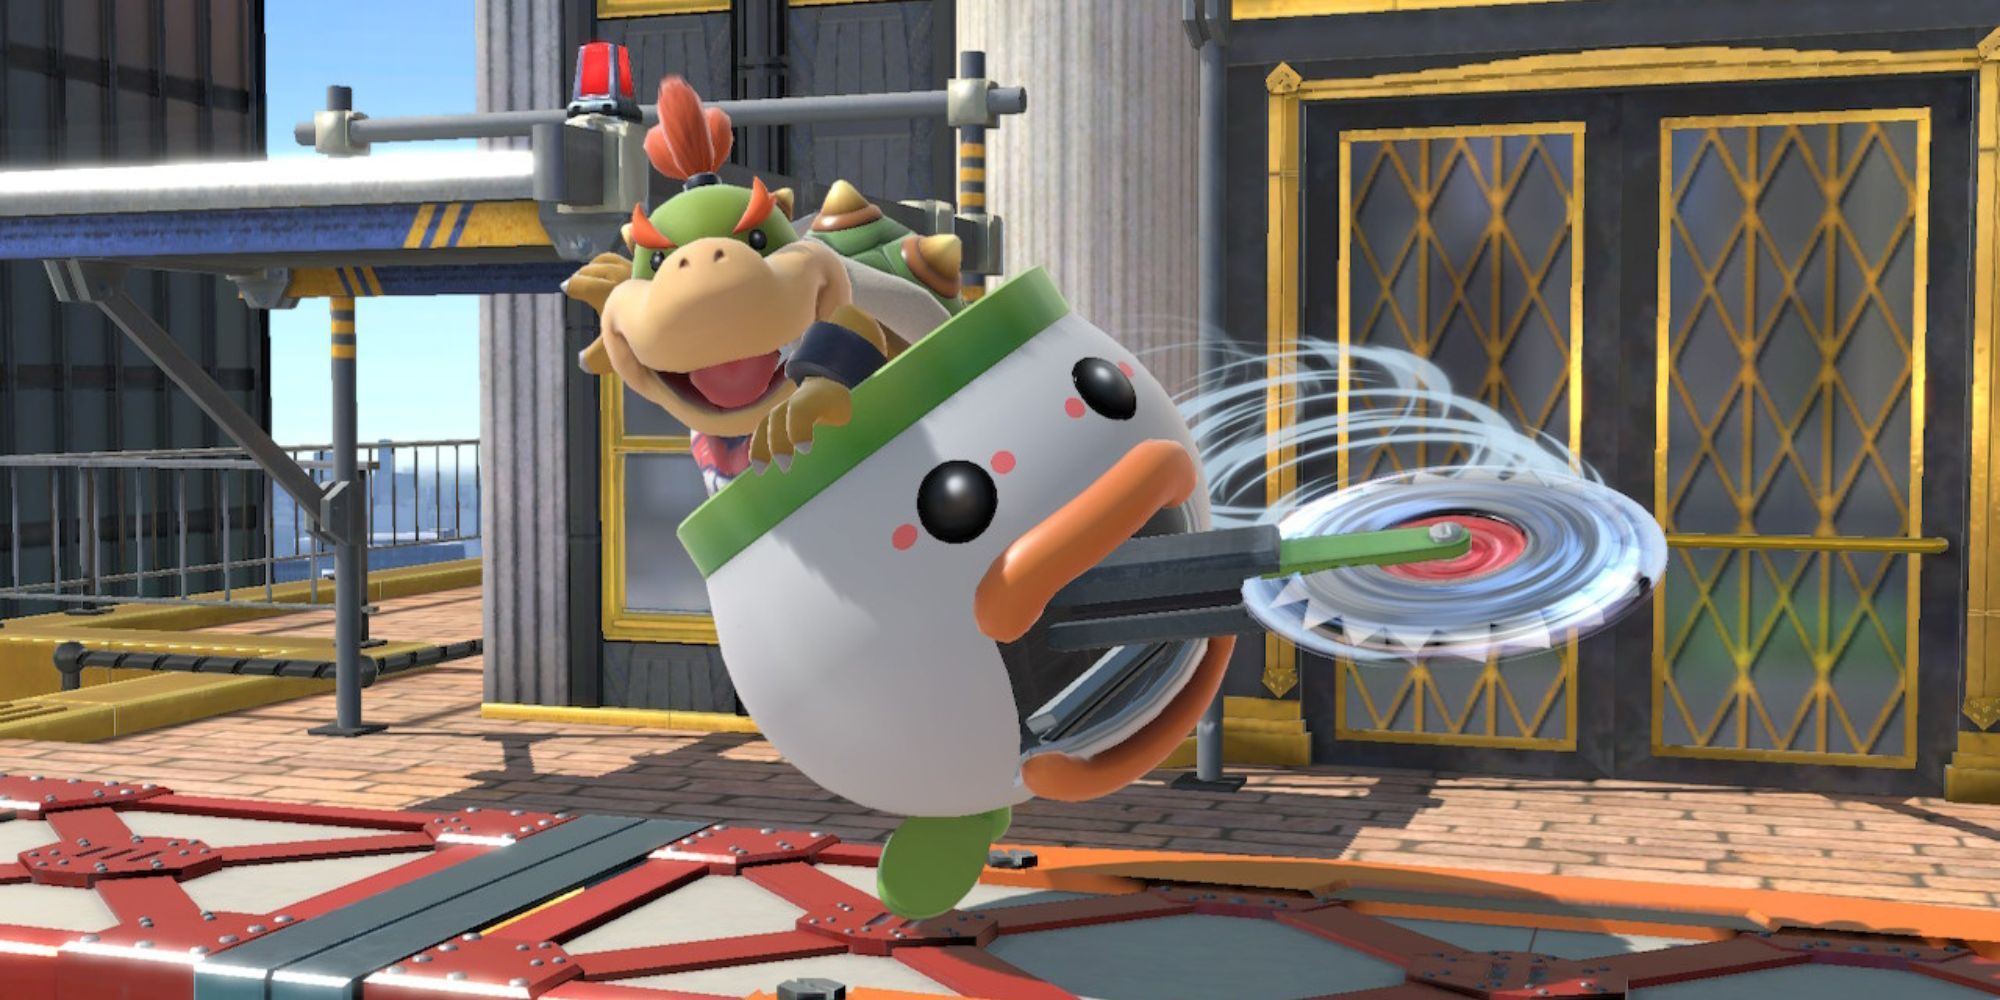 Bowser Jr. uses his buzzsaw attack on the Super Mario Odyssey stage